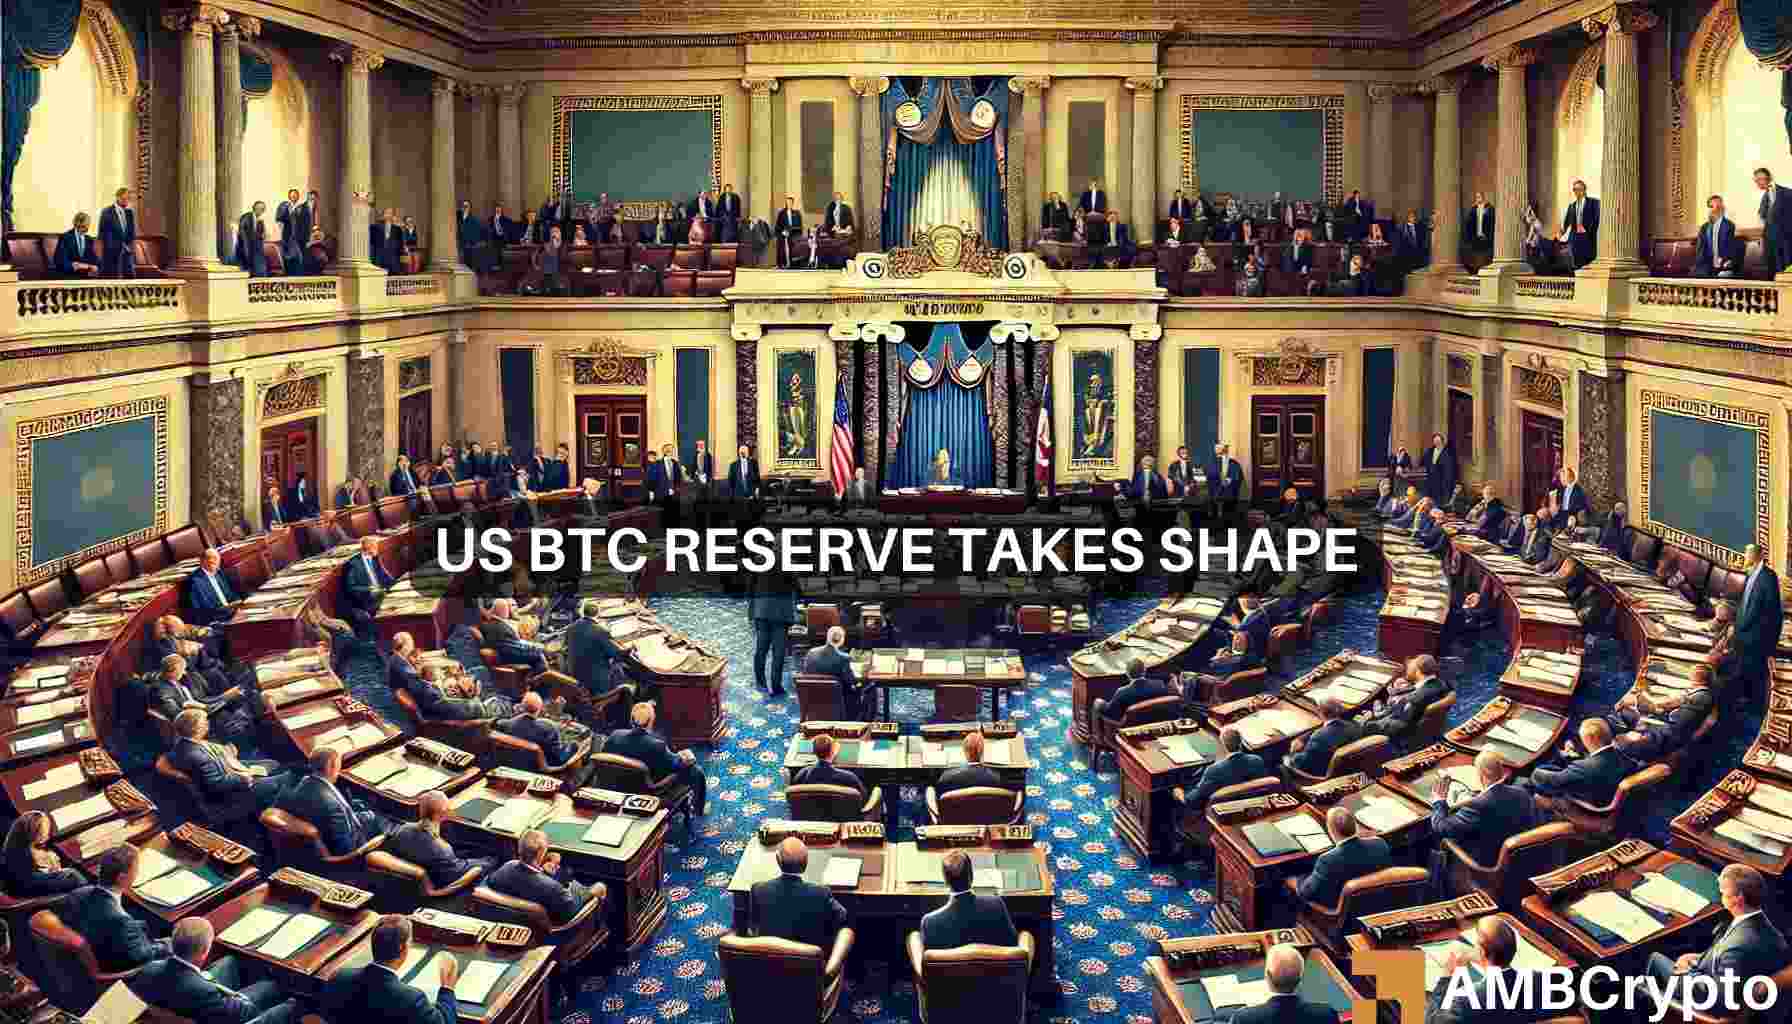 Senator Lummis introduces BITCOIN bill, but don’t get excited just yet